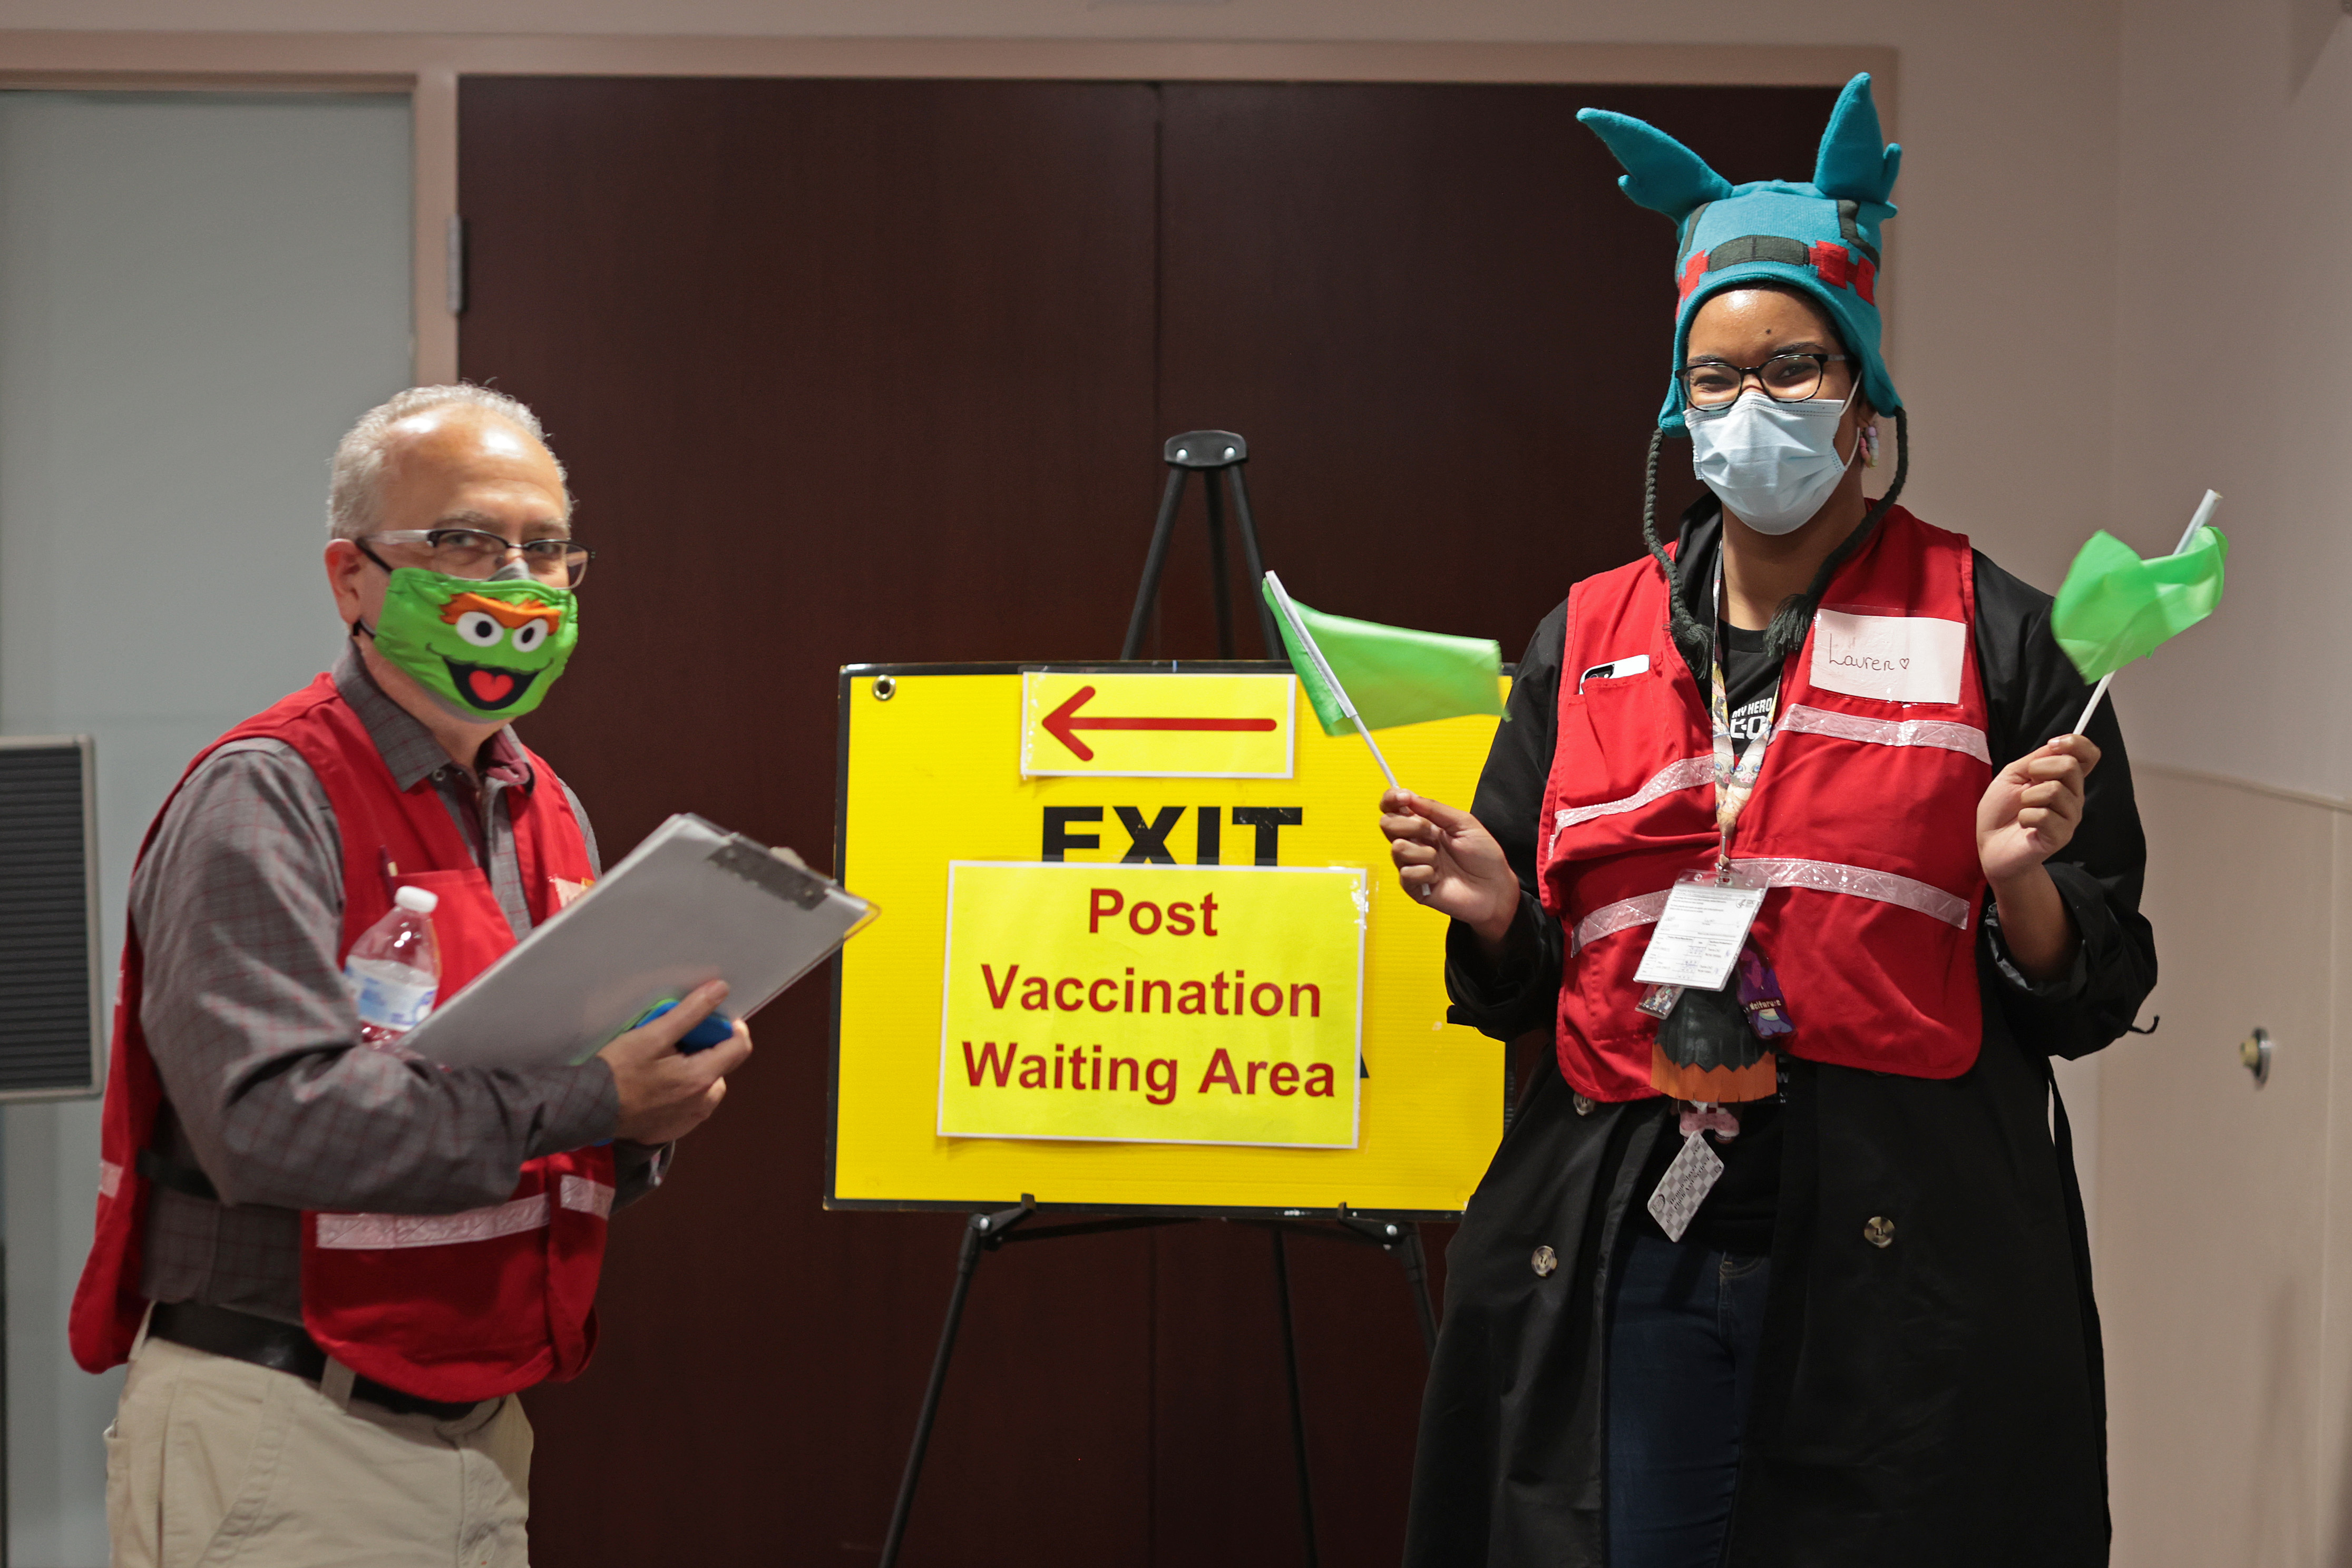 Ushers wear festive hats and masks to welcome children to the Fairfax County Government Center to receive COVID-19 vaccines on Nov. 4, 2021 in Annandale, Virginia. (Chip Somodevilla—Getty Images)